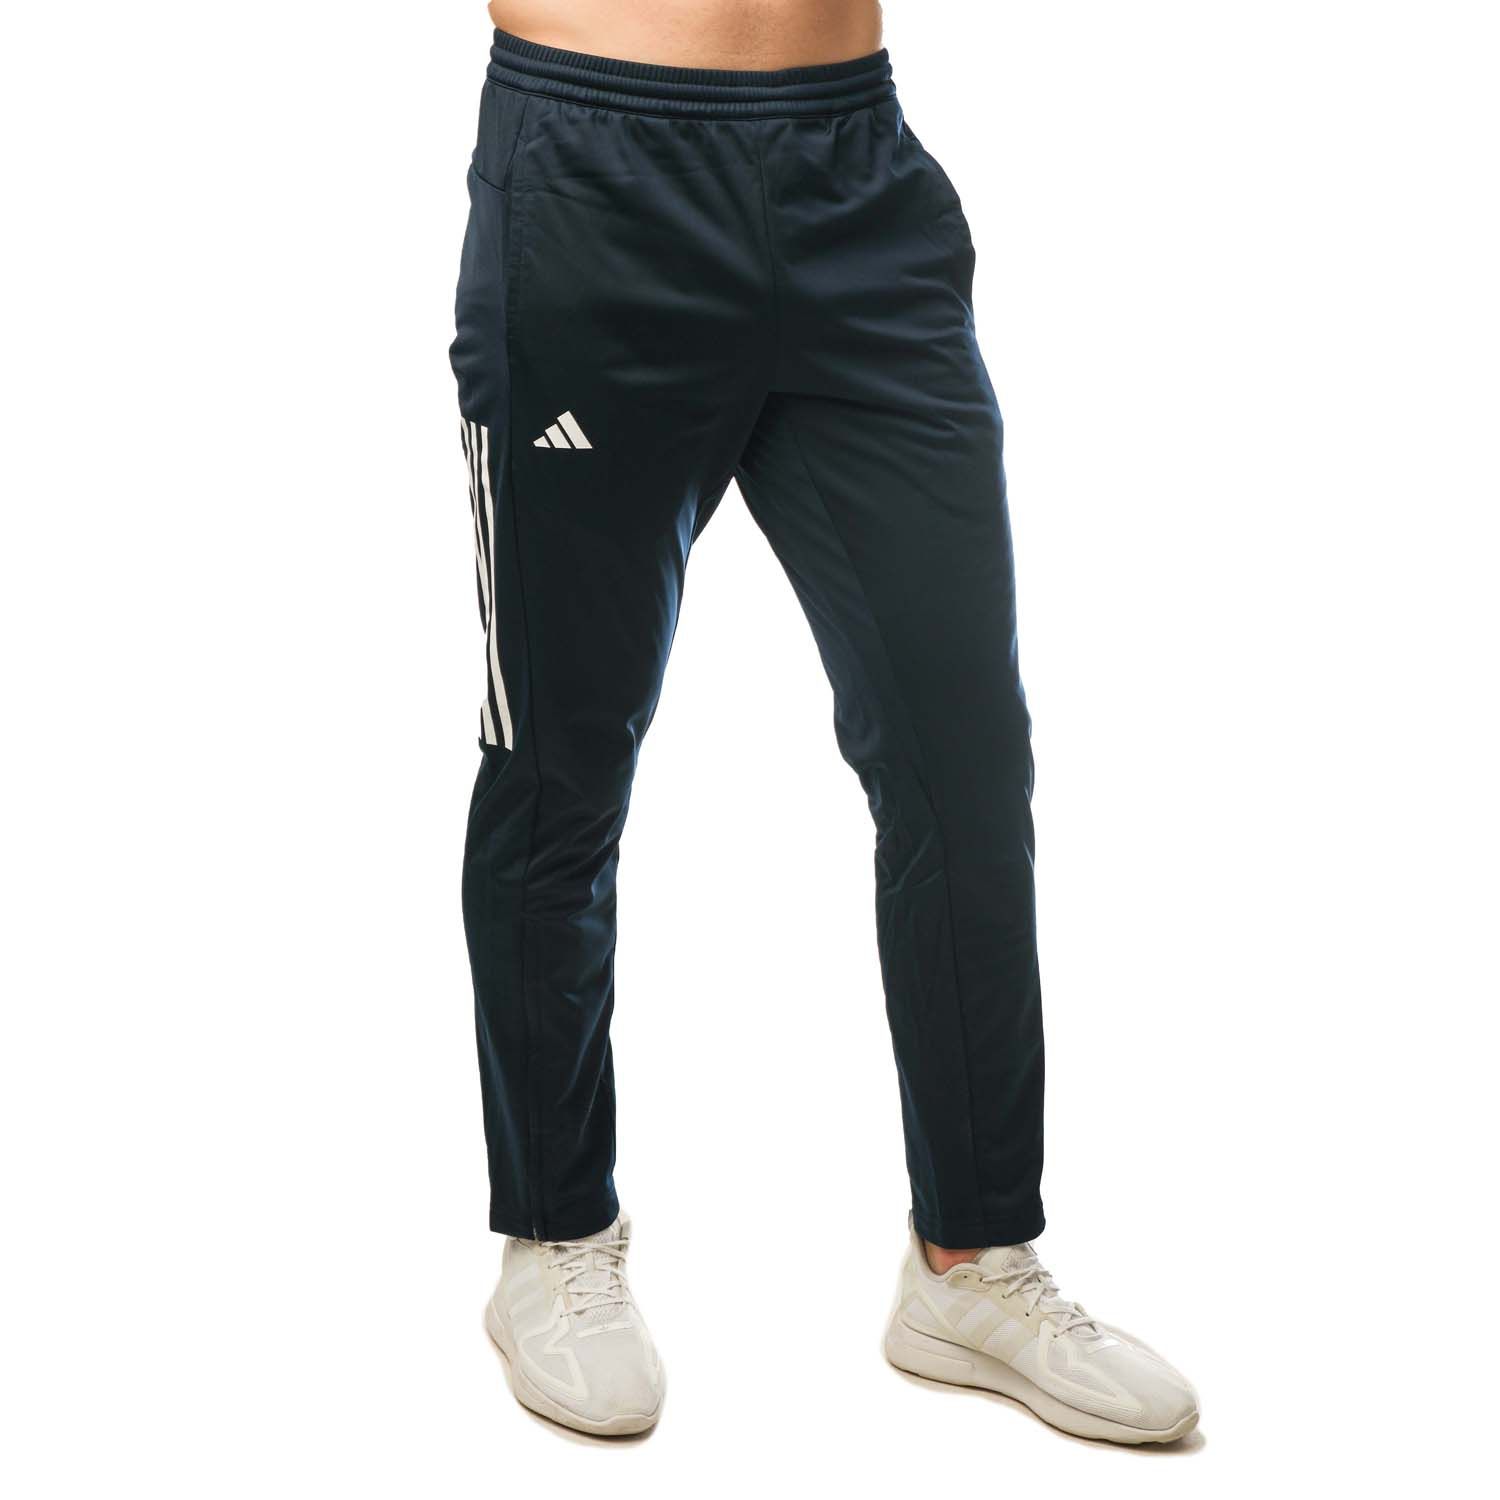 Mens 3 Stripes Knitted Pants